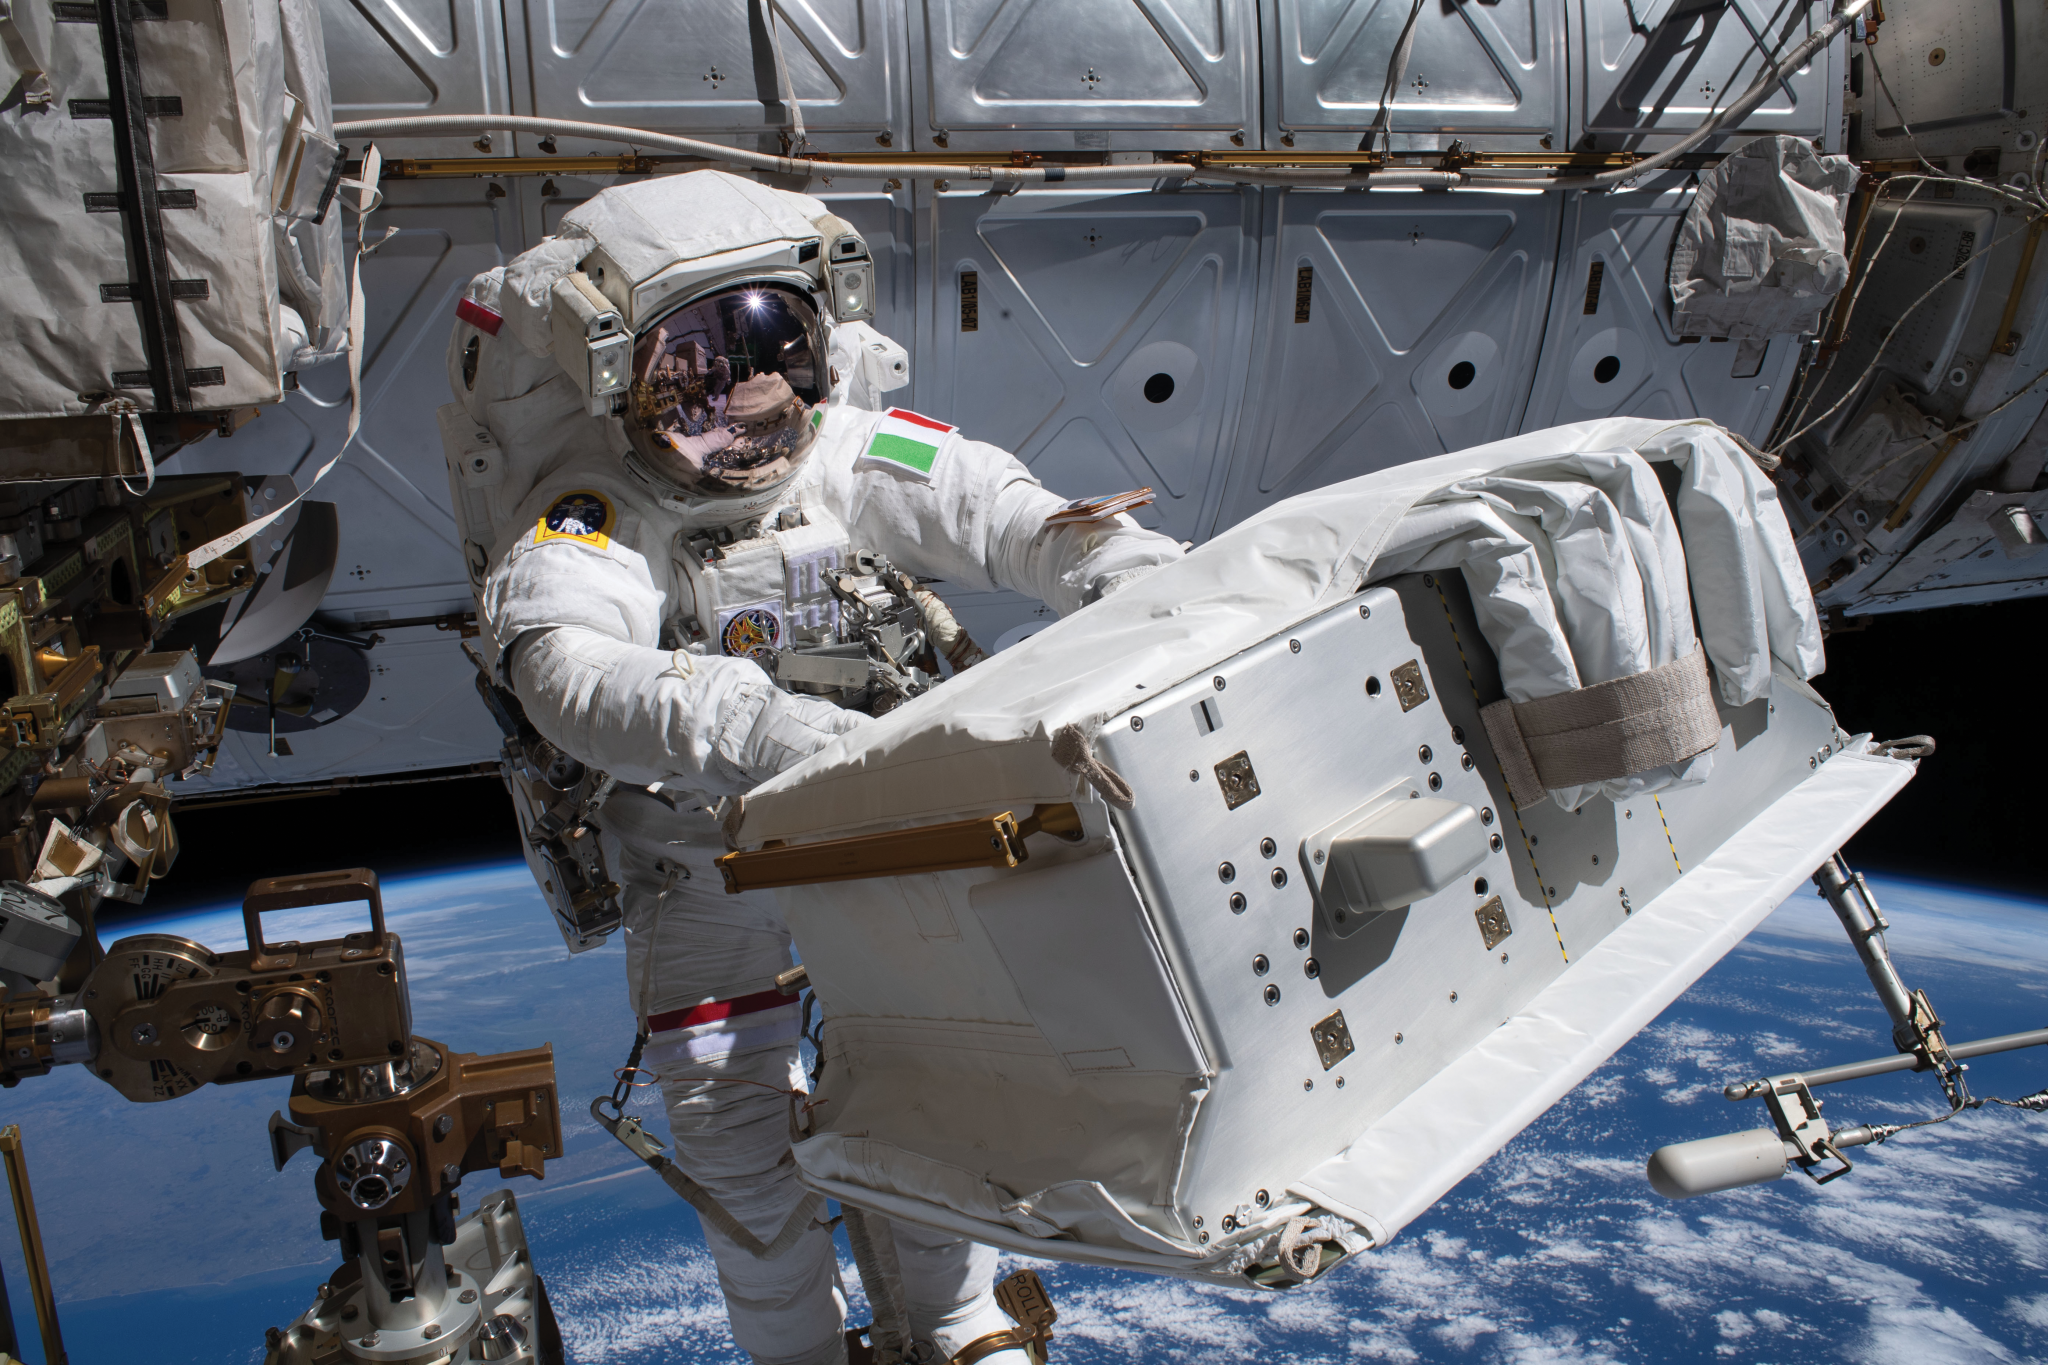 image of an astronaut carrying hardware during a spacewalk